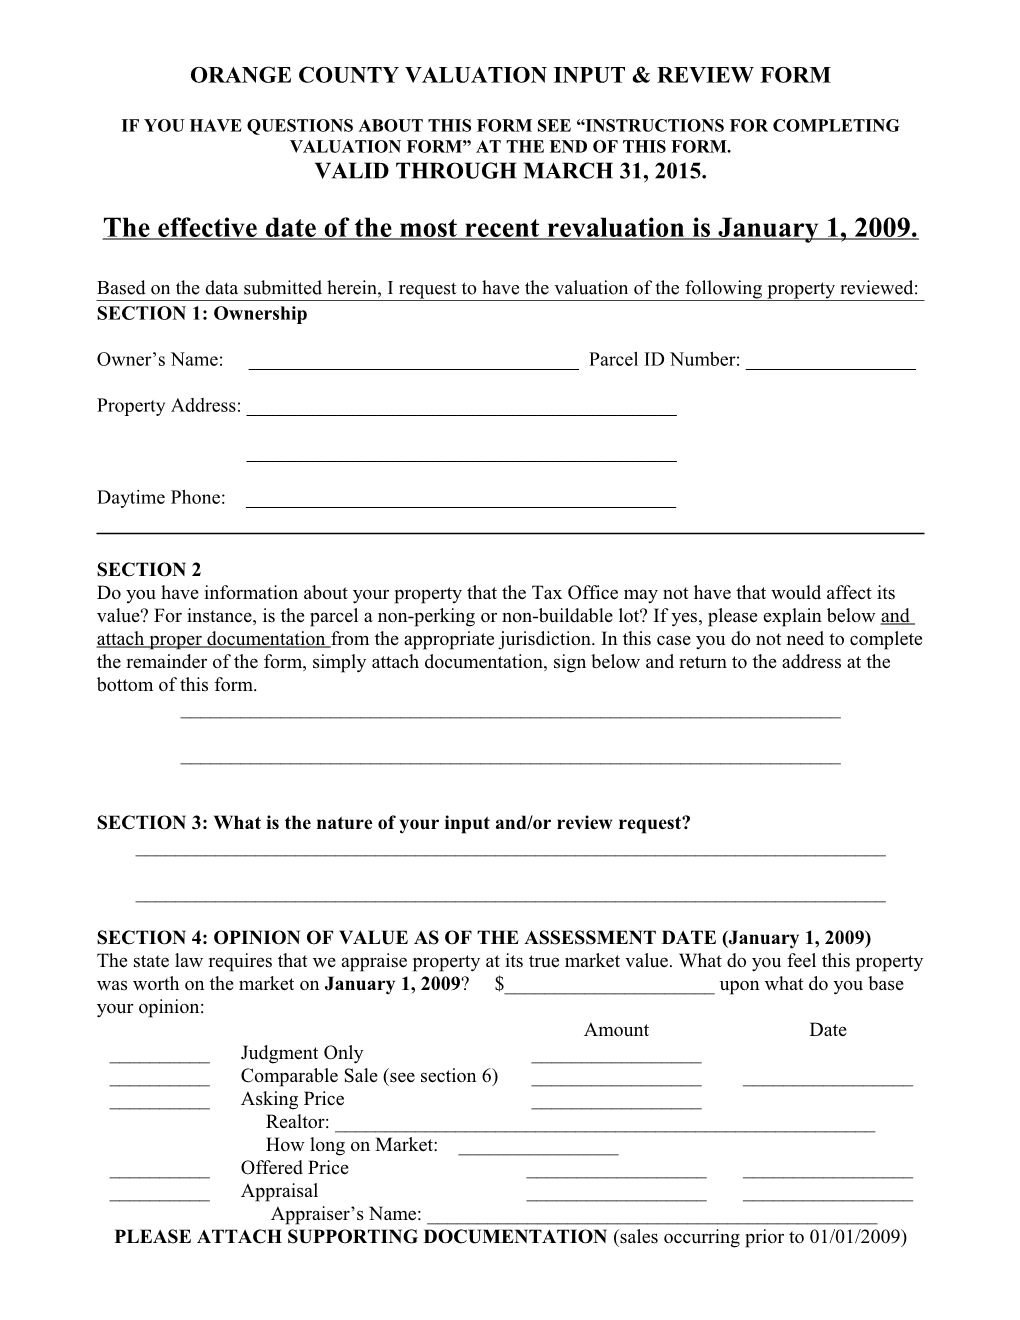 Orange County Valuation Review Form